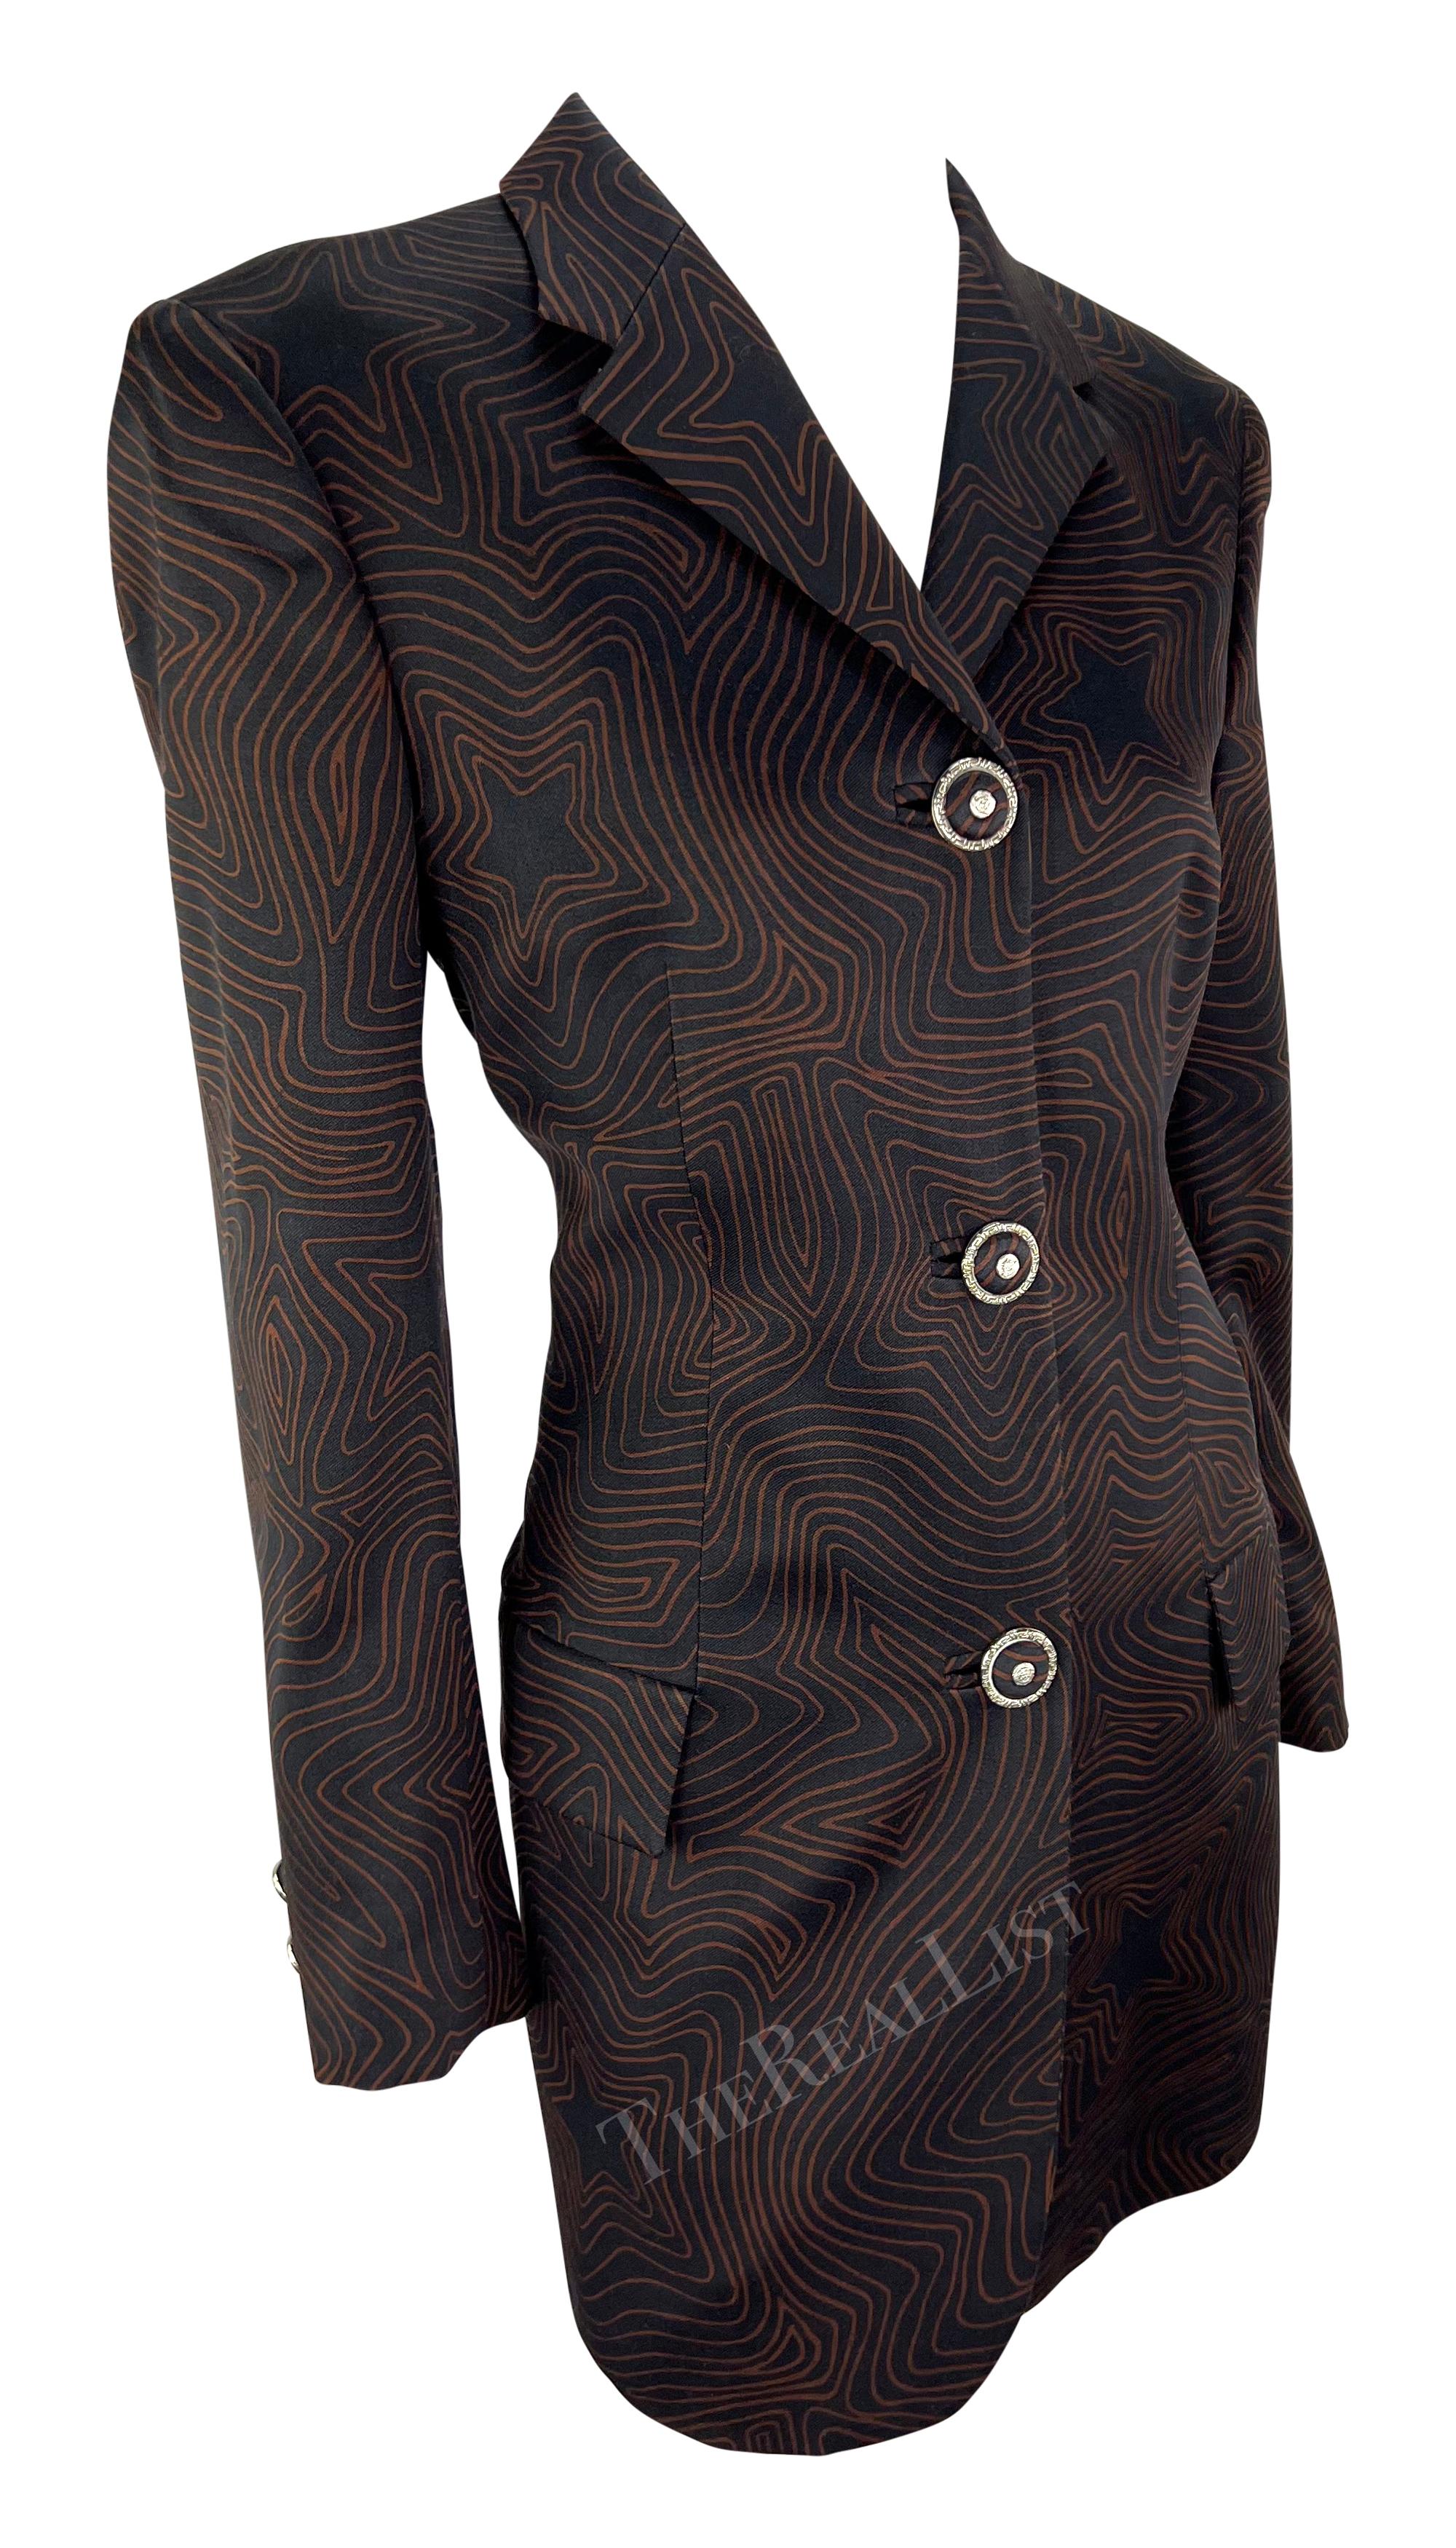 S/S 1996 Gianni Versace Black Brown Abstract Star Print Blazer For Sale 3